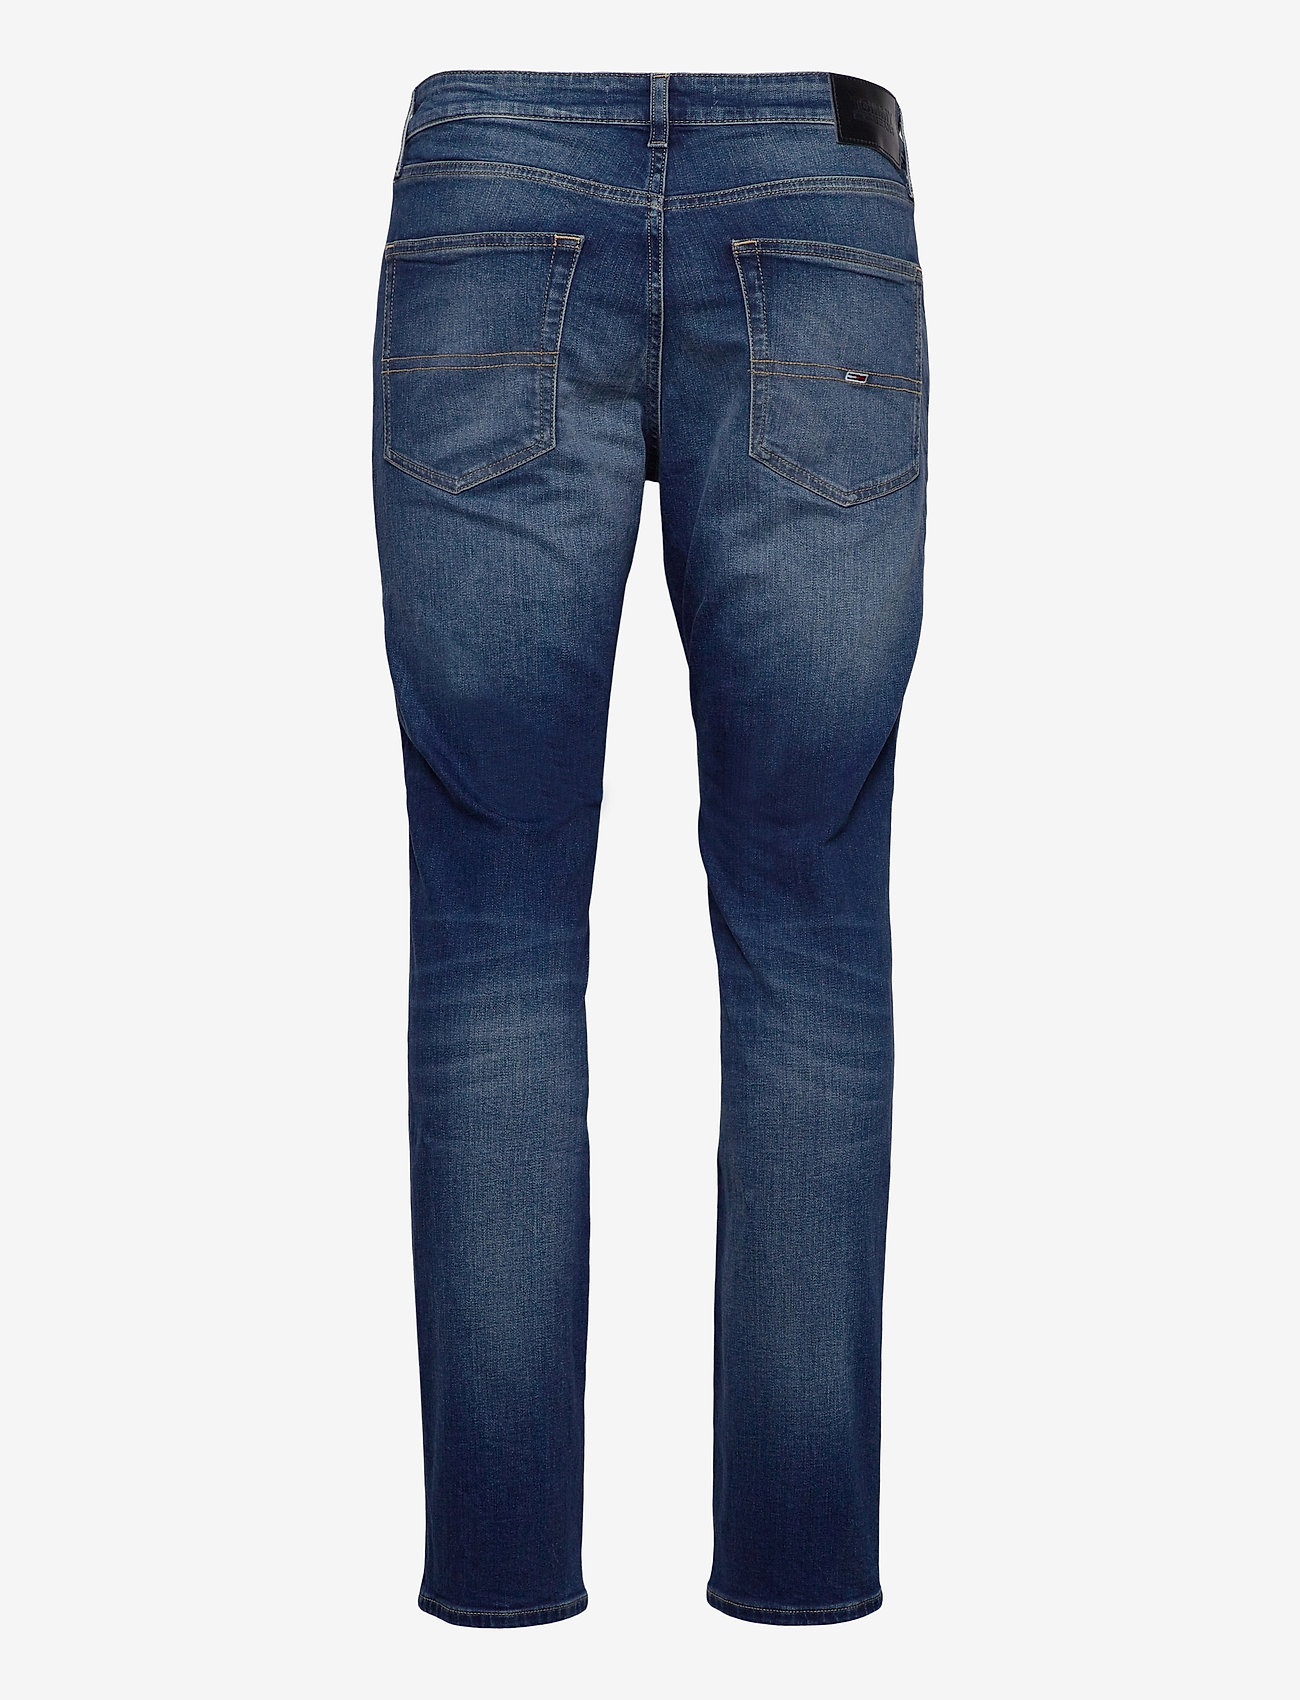 Tommy Jeans - SCANTON SLIM WMBS - slim fit jeans - wilson mid blue stretch - 1